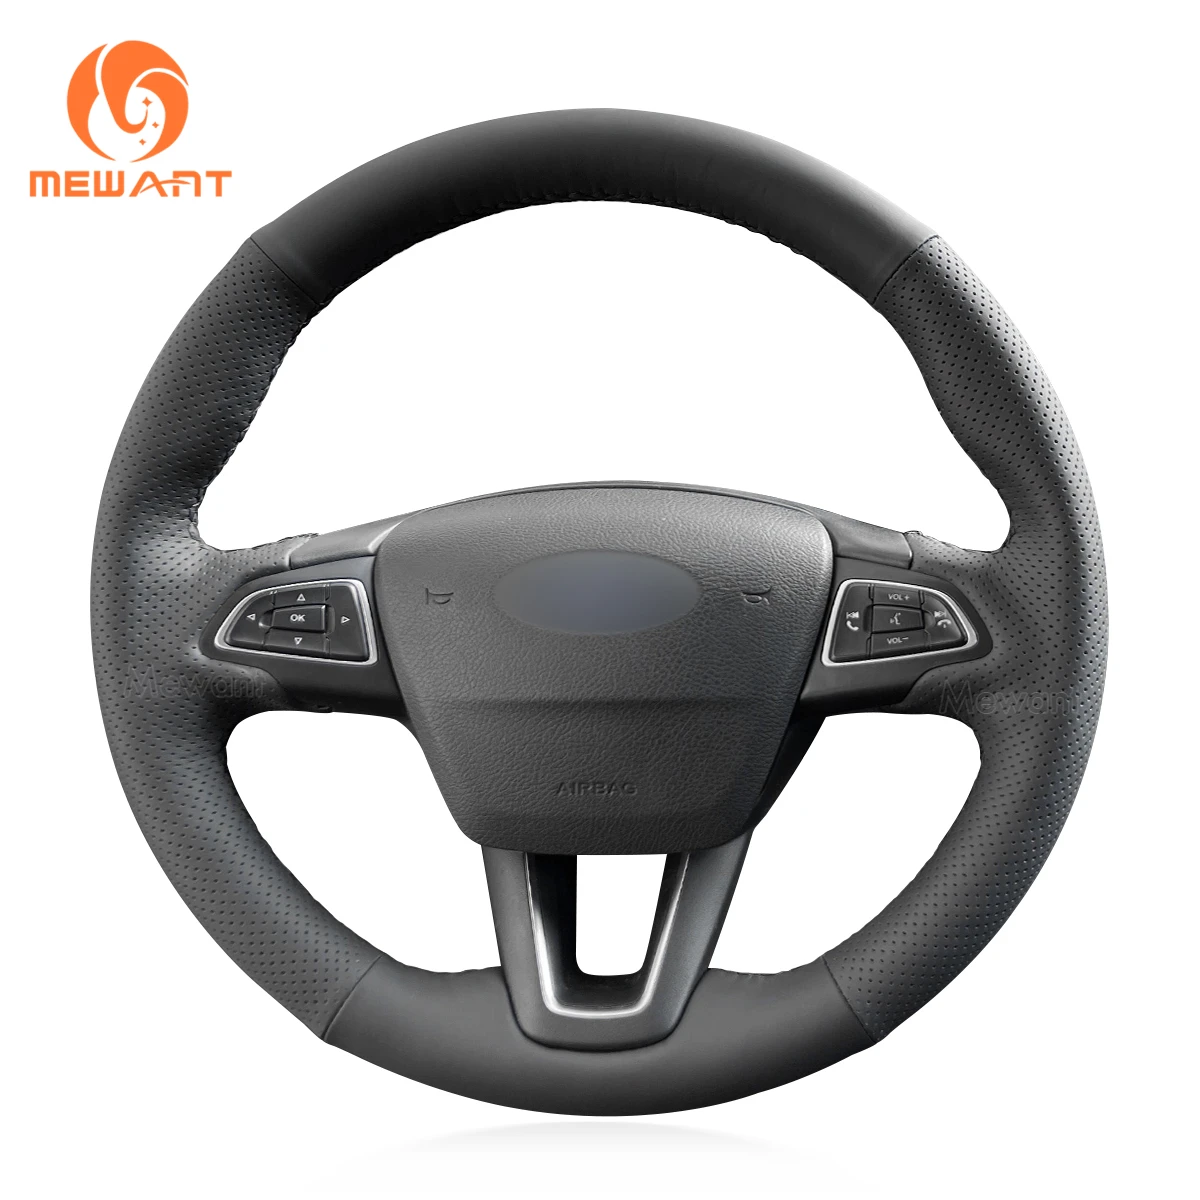 

Custom Hand Stitching PU Leather Steering Wheel Cover for Ford Focus Kuga C-MAX Ecosport Escape 2015 2016 2017 2018 2019 2020